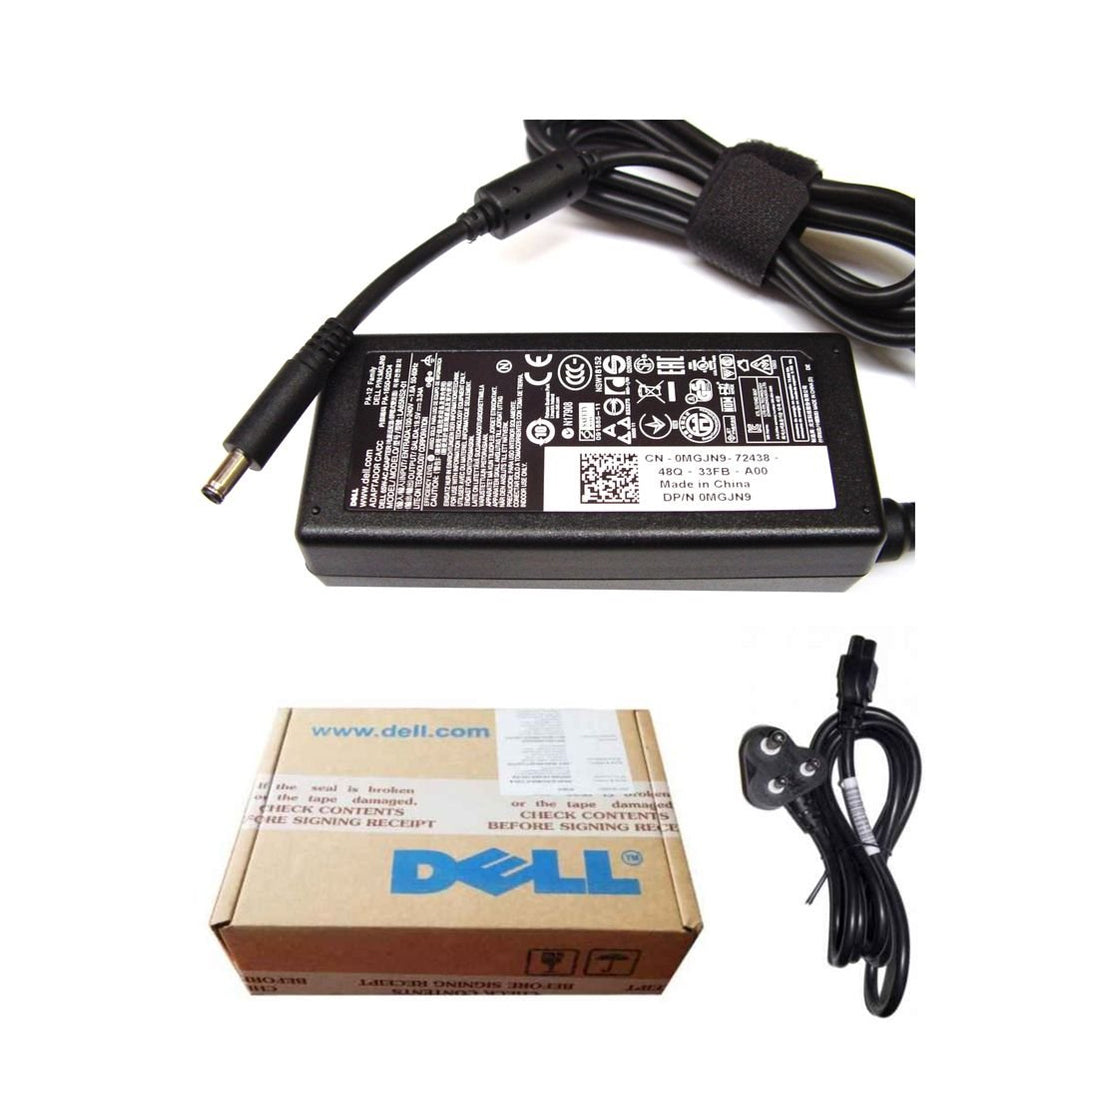 Dell Original 65W 19.5V 4.5mm Pin Laptop Charger Adapter for Inspiron 14 5482 With Power Cord